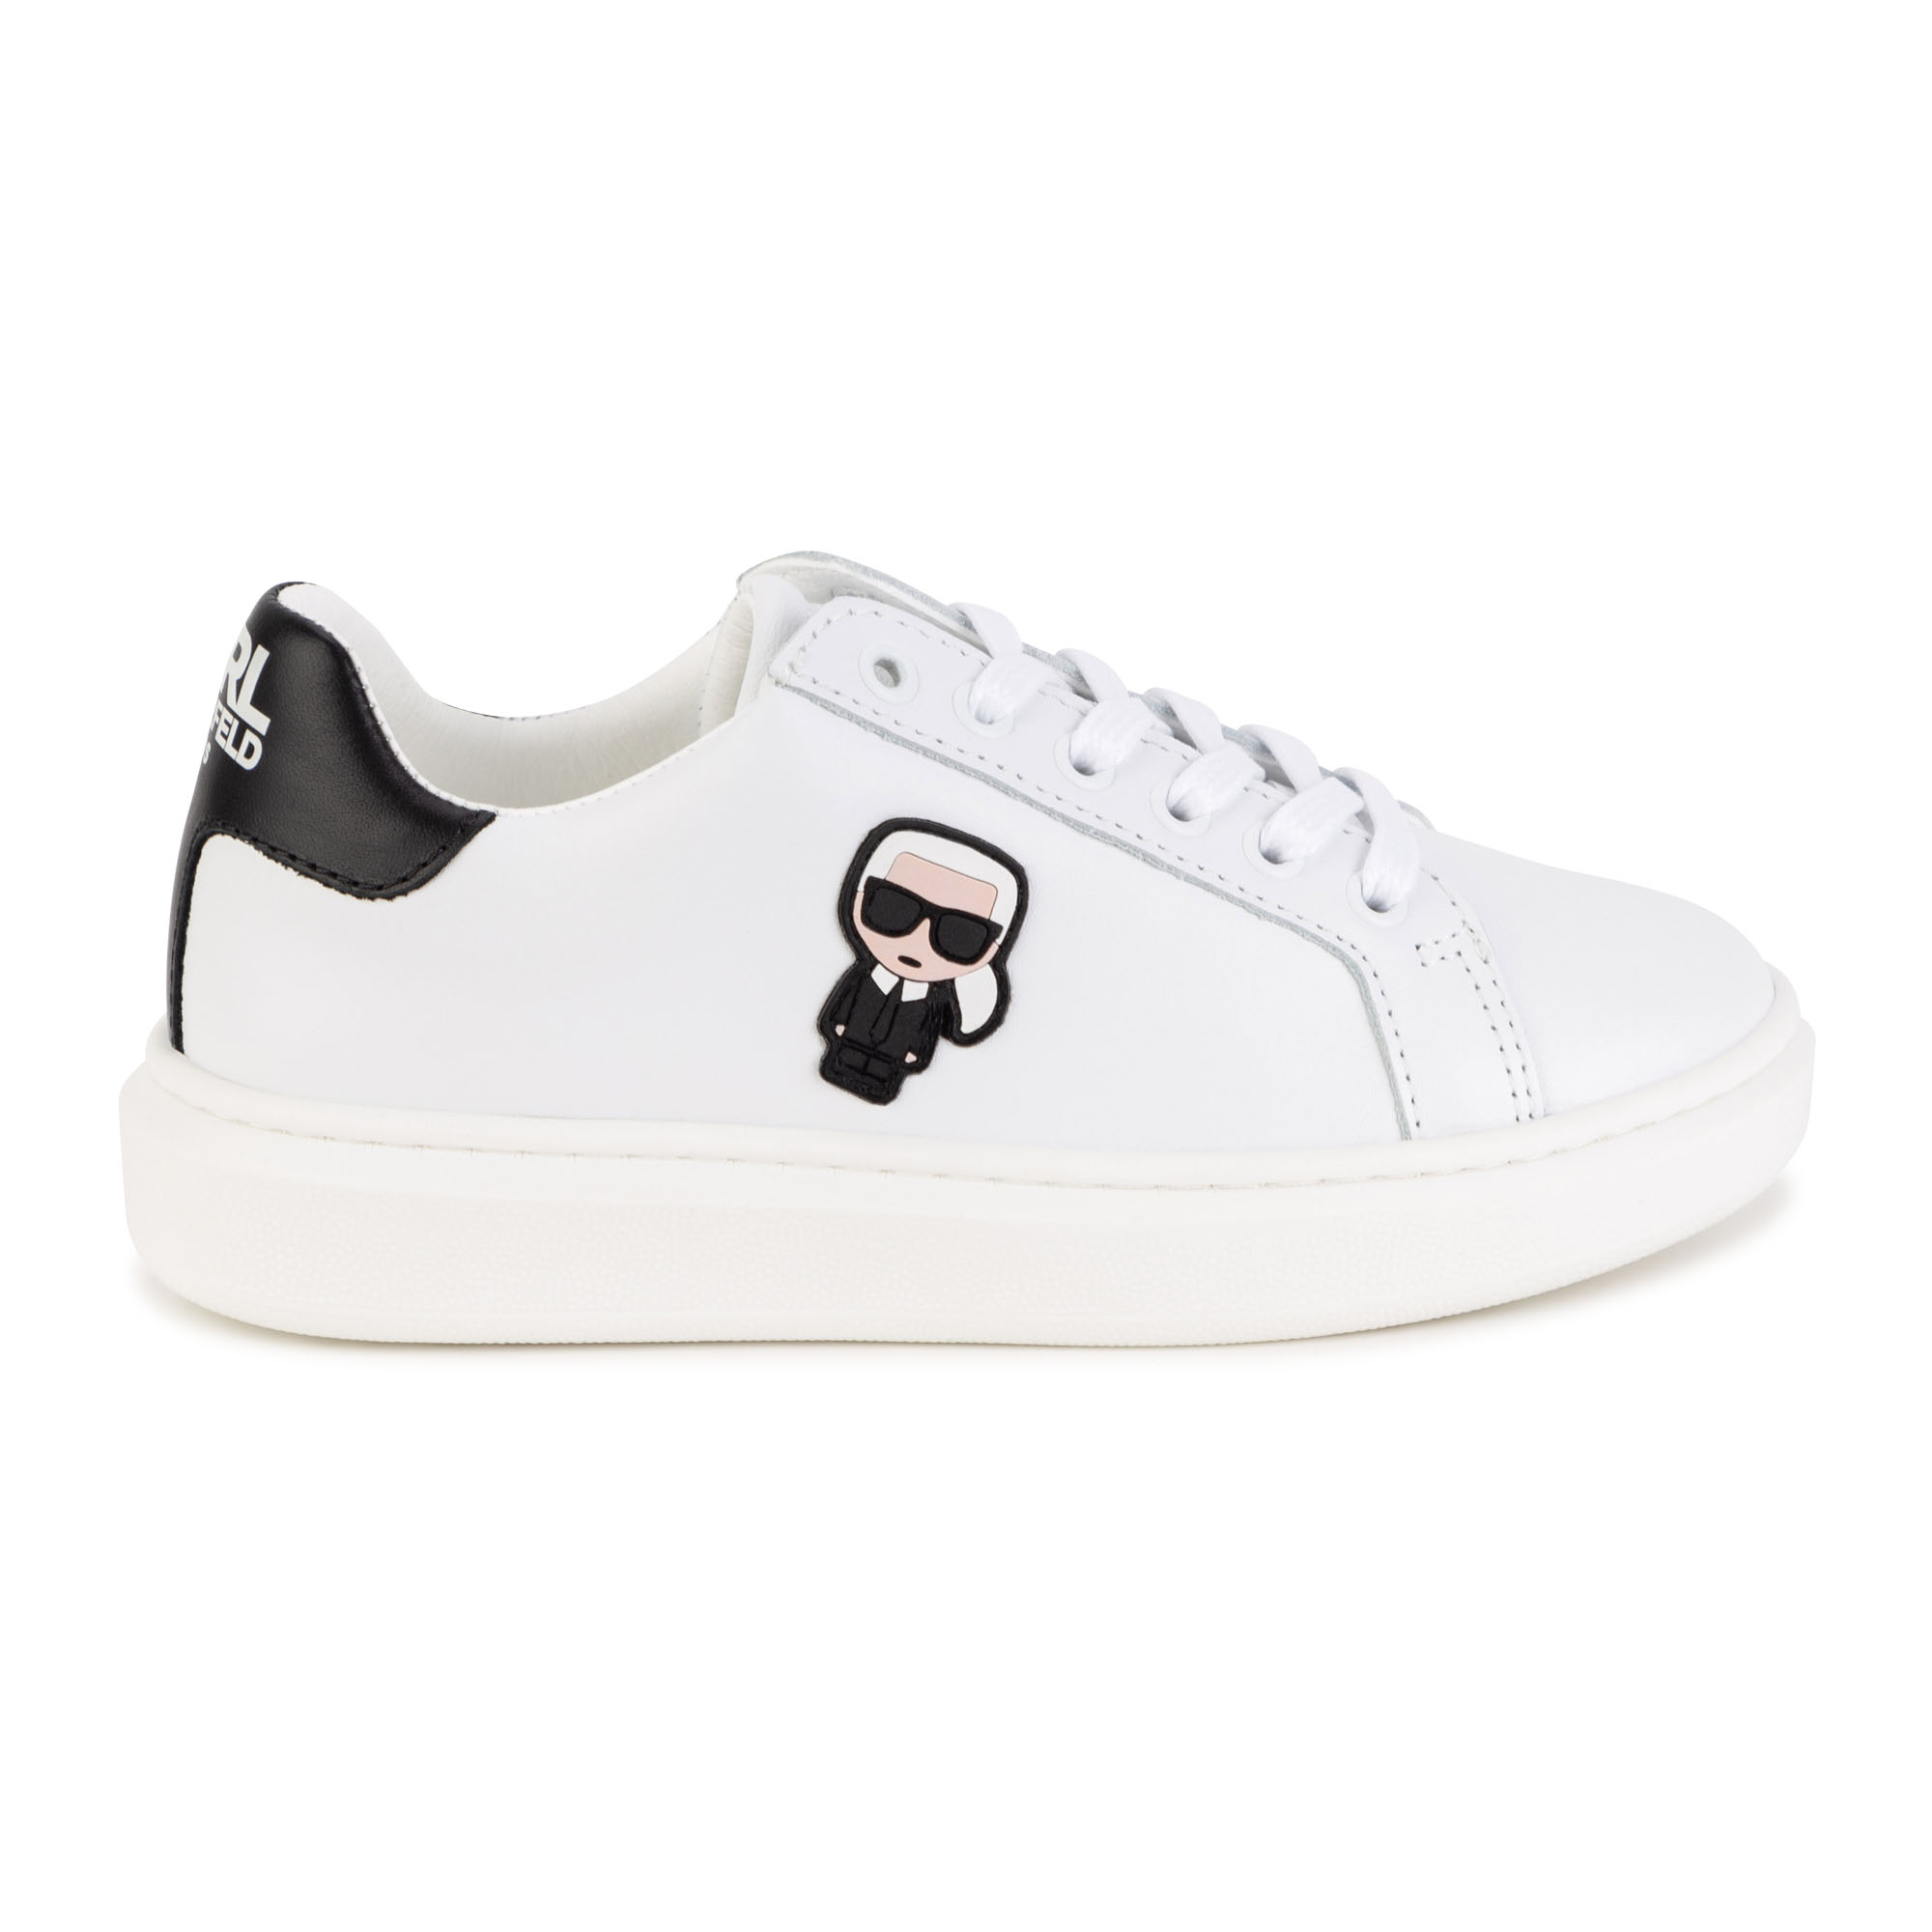 Laced leather low-top sneakers KARL LAGERFELD KIDS for BOY